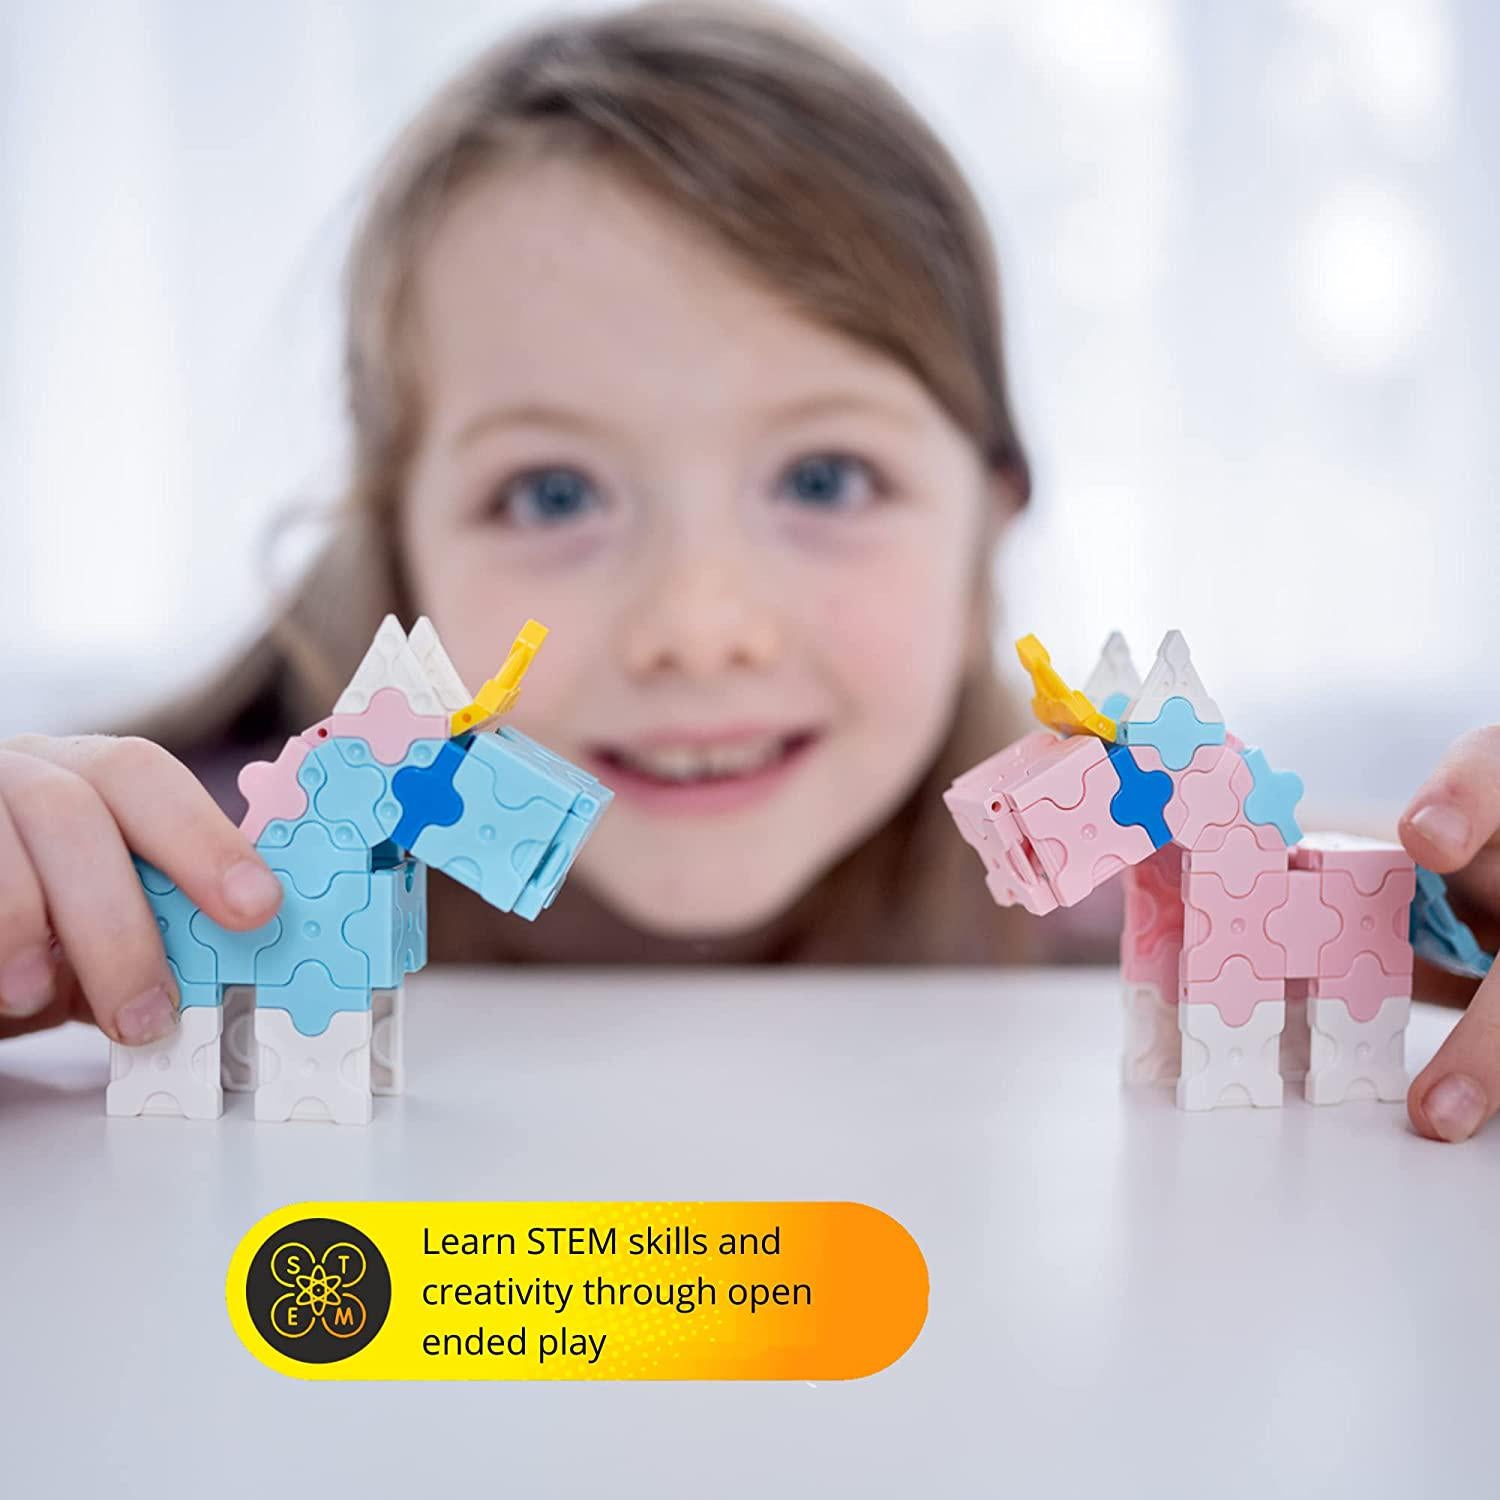 LaQ, LaQ Sweet Collection Unicorn - 6 Models, 175 Pieces | Construction Stem Set | Educational Engineering Toy for Ages 5, 6, 7, 8, 9, 10 Year Old Boys and Girls | Best Kids Fun Building kit